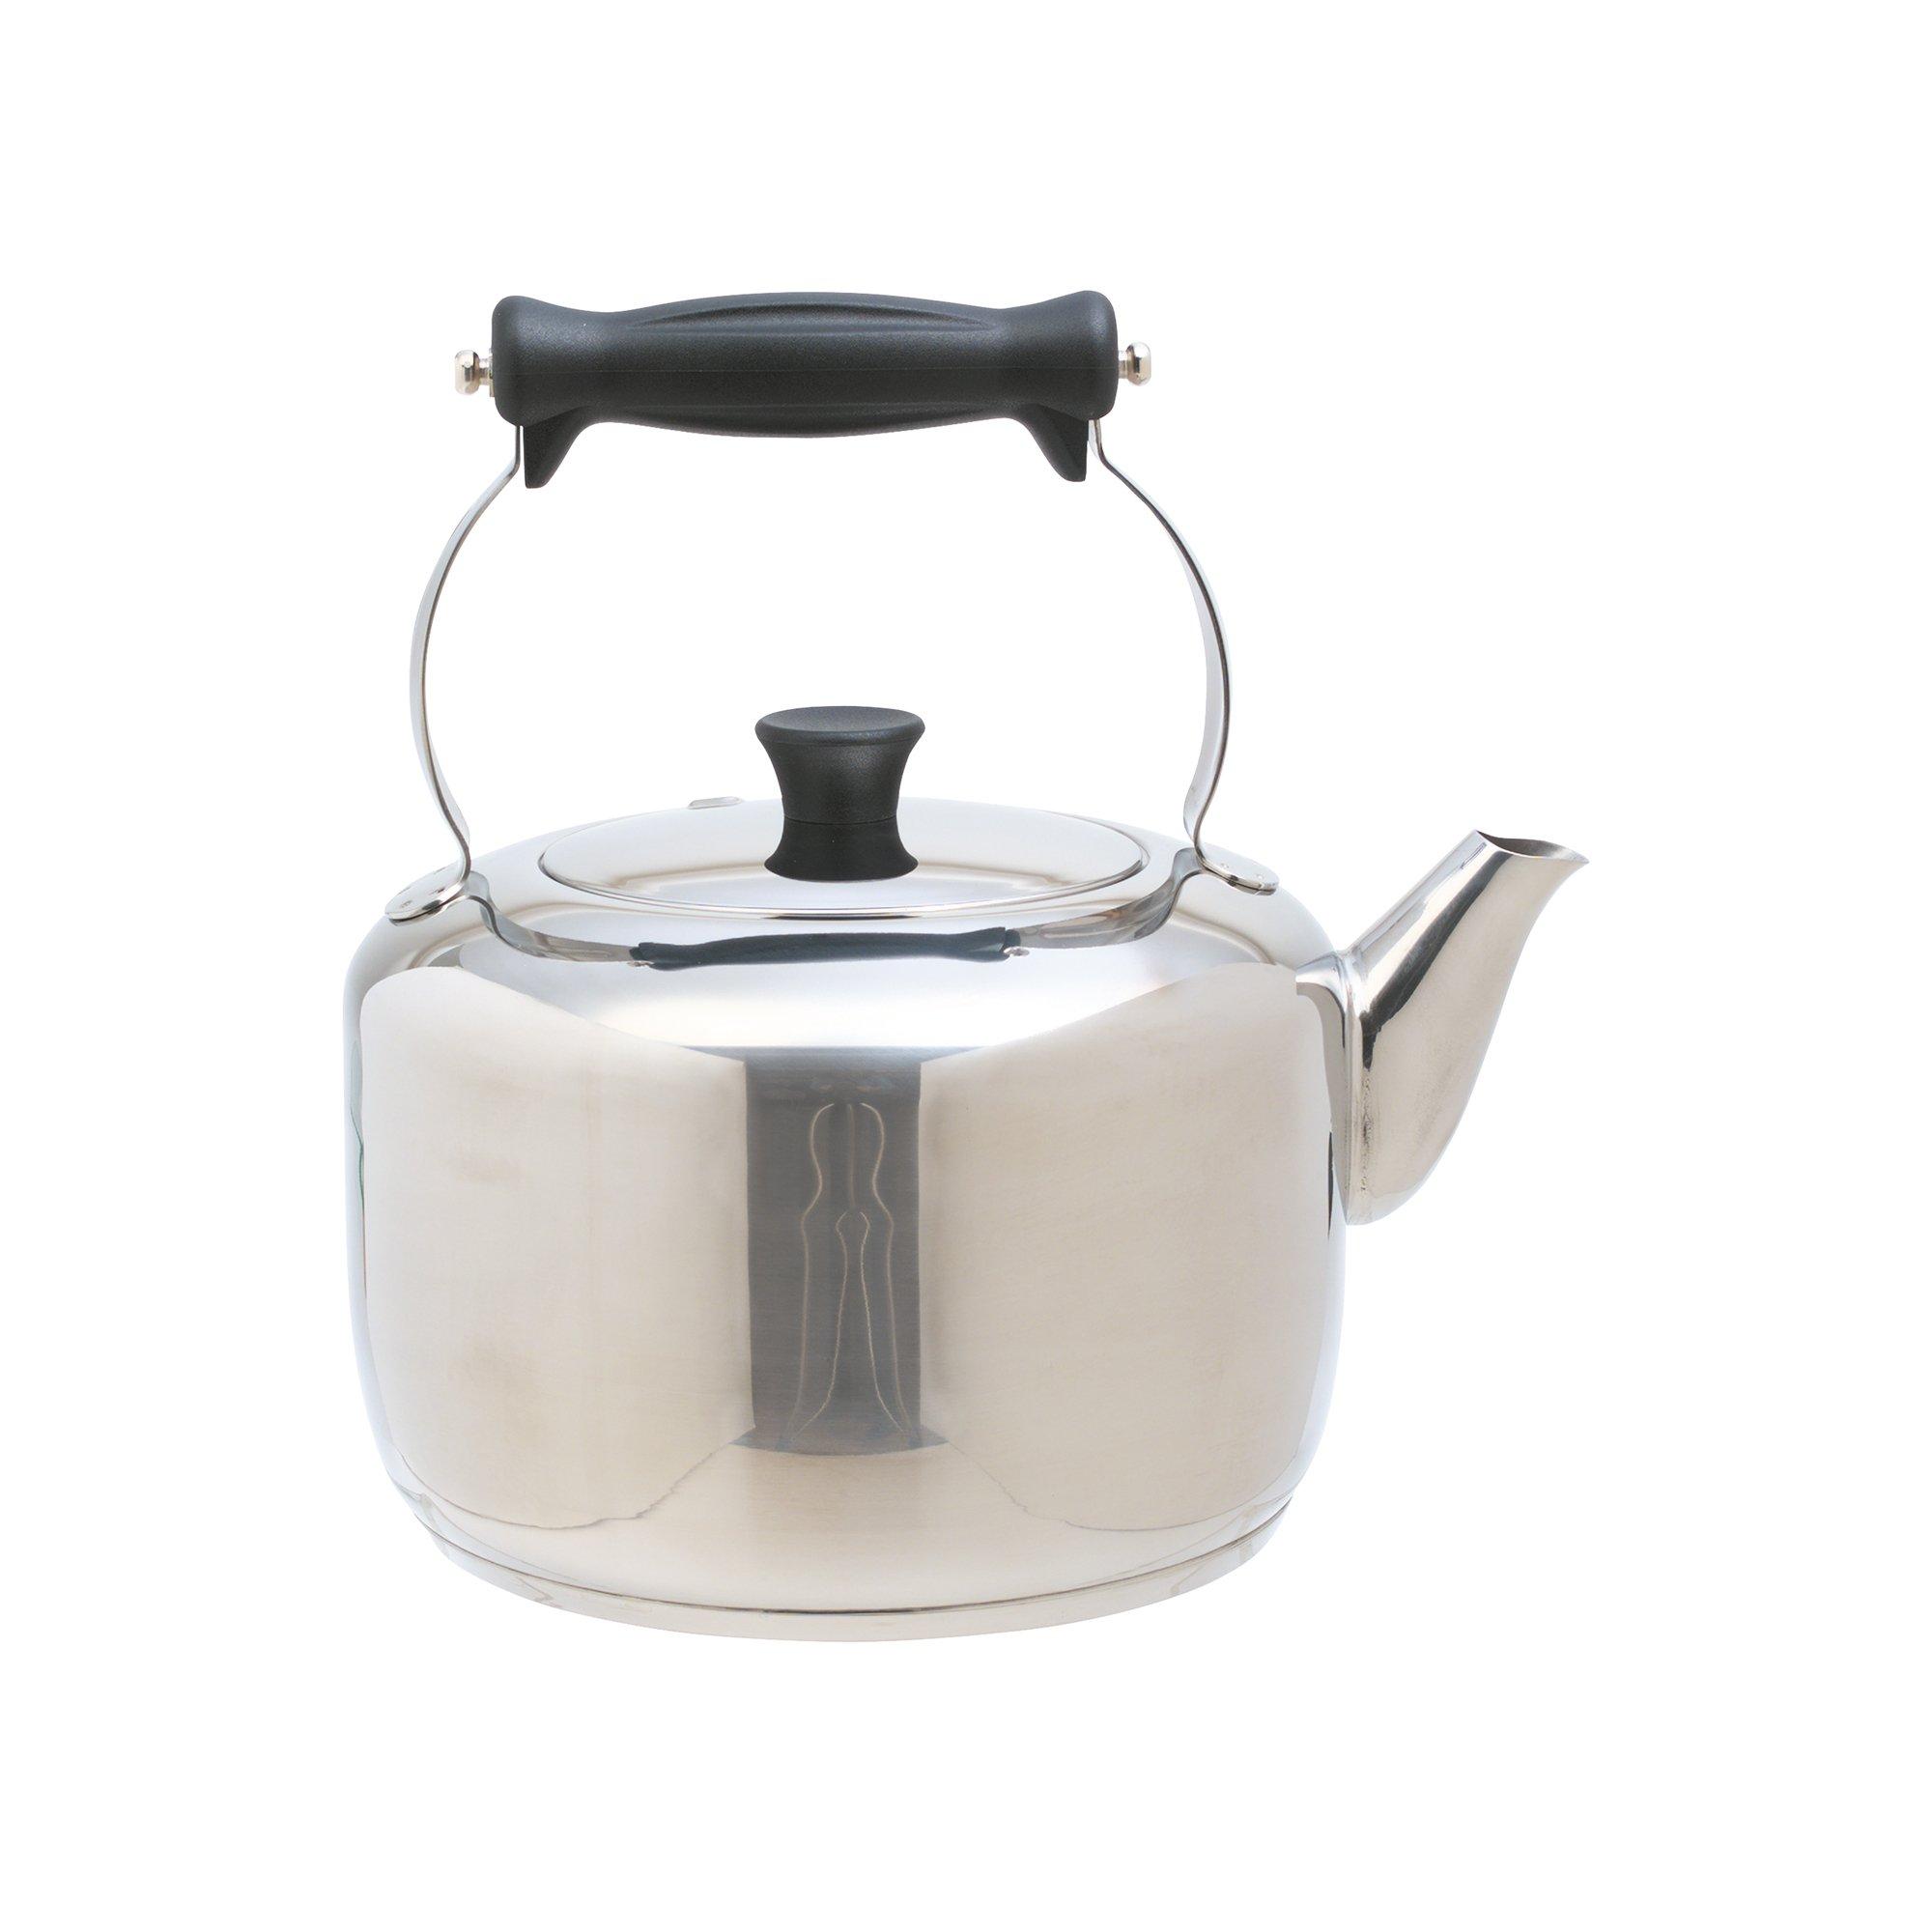 Deluxe Traditional Stainless Steel Kettle 2 Litres, Gift Boxed